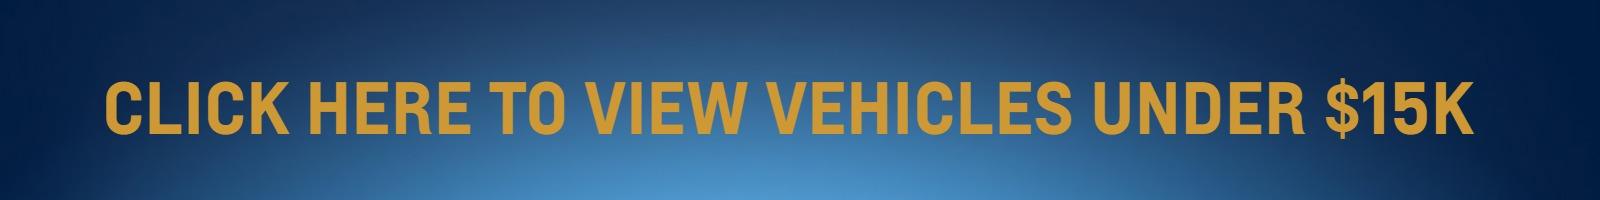 Click Here to View Vehicles Under $15K